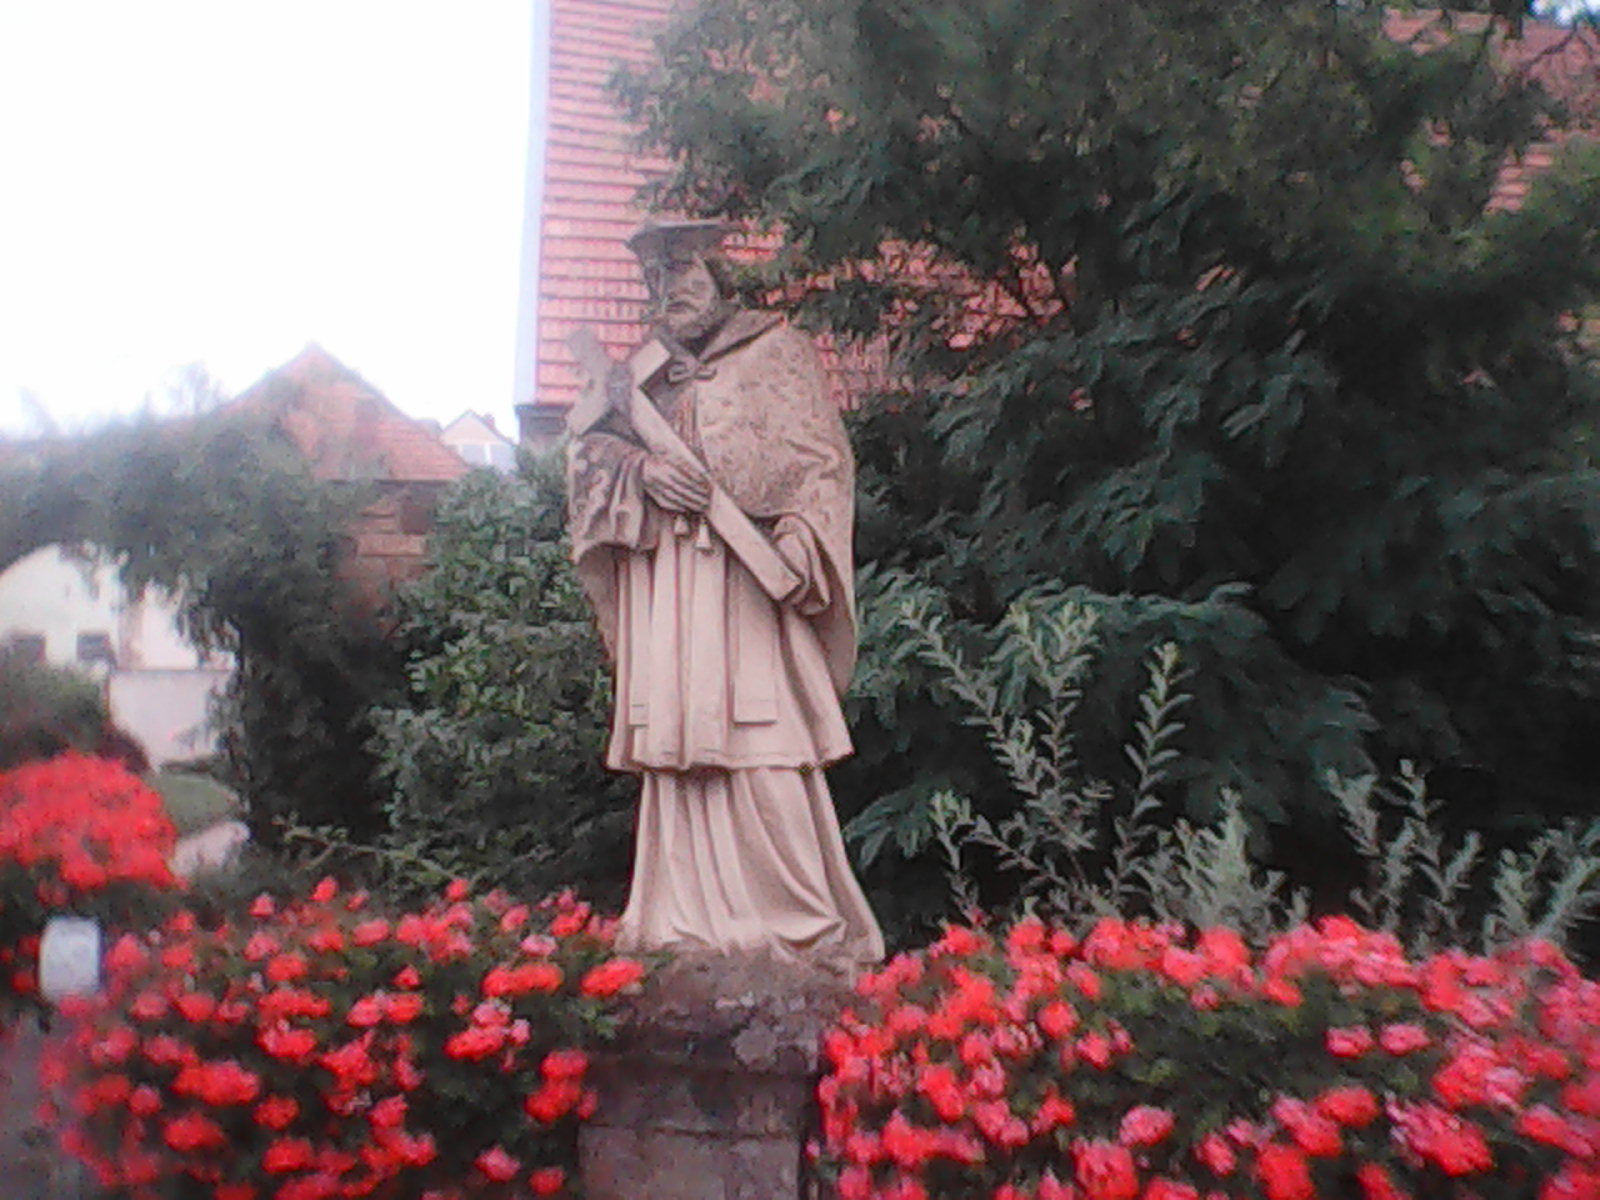 Statue of a holy man, surrounded by red flowers.